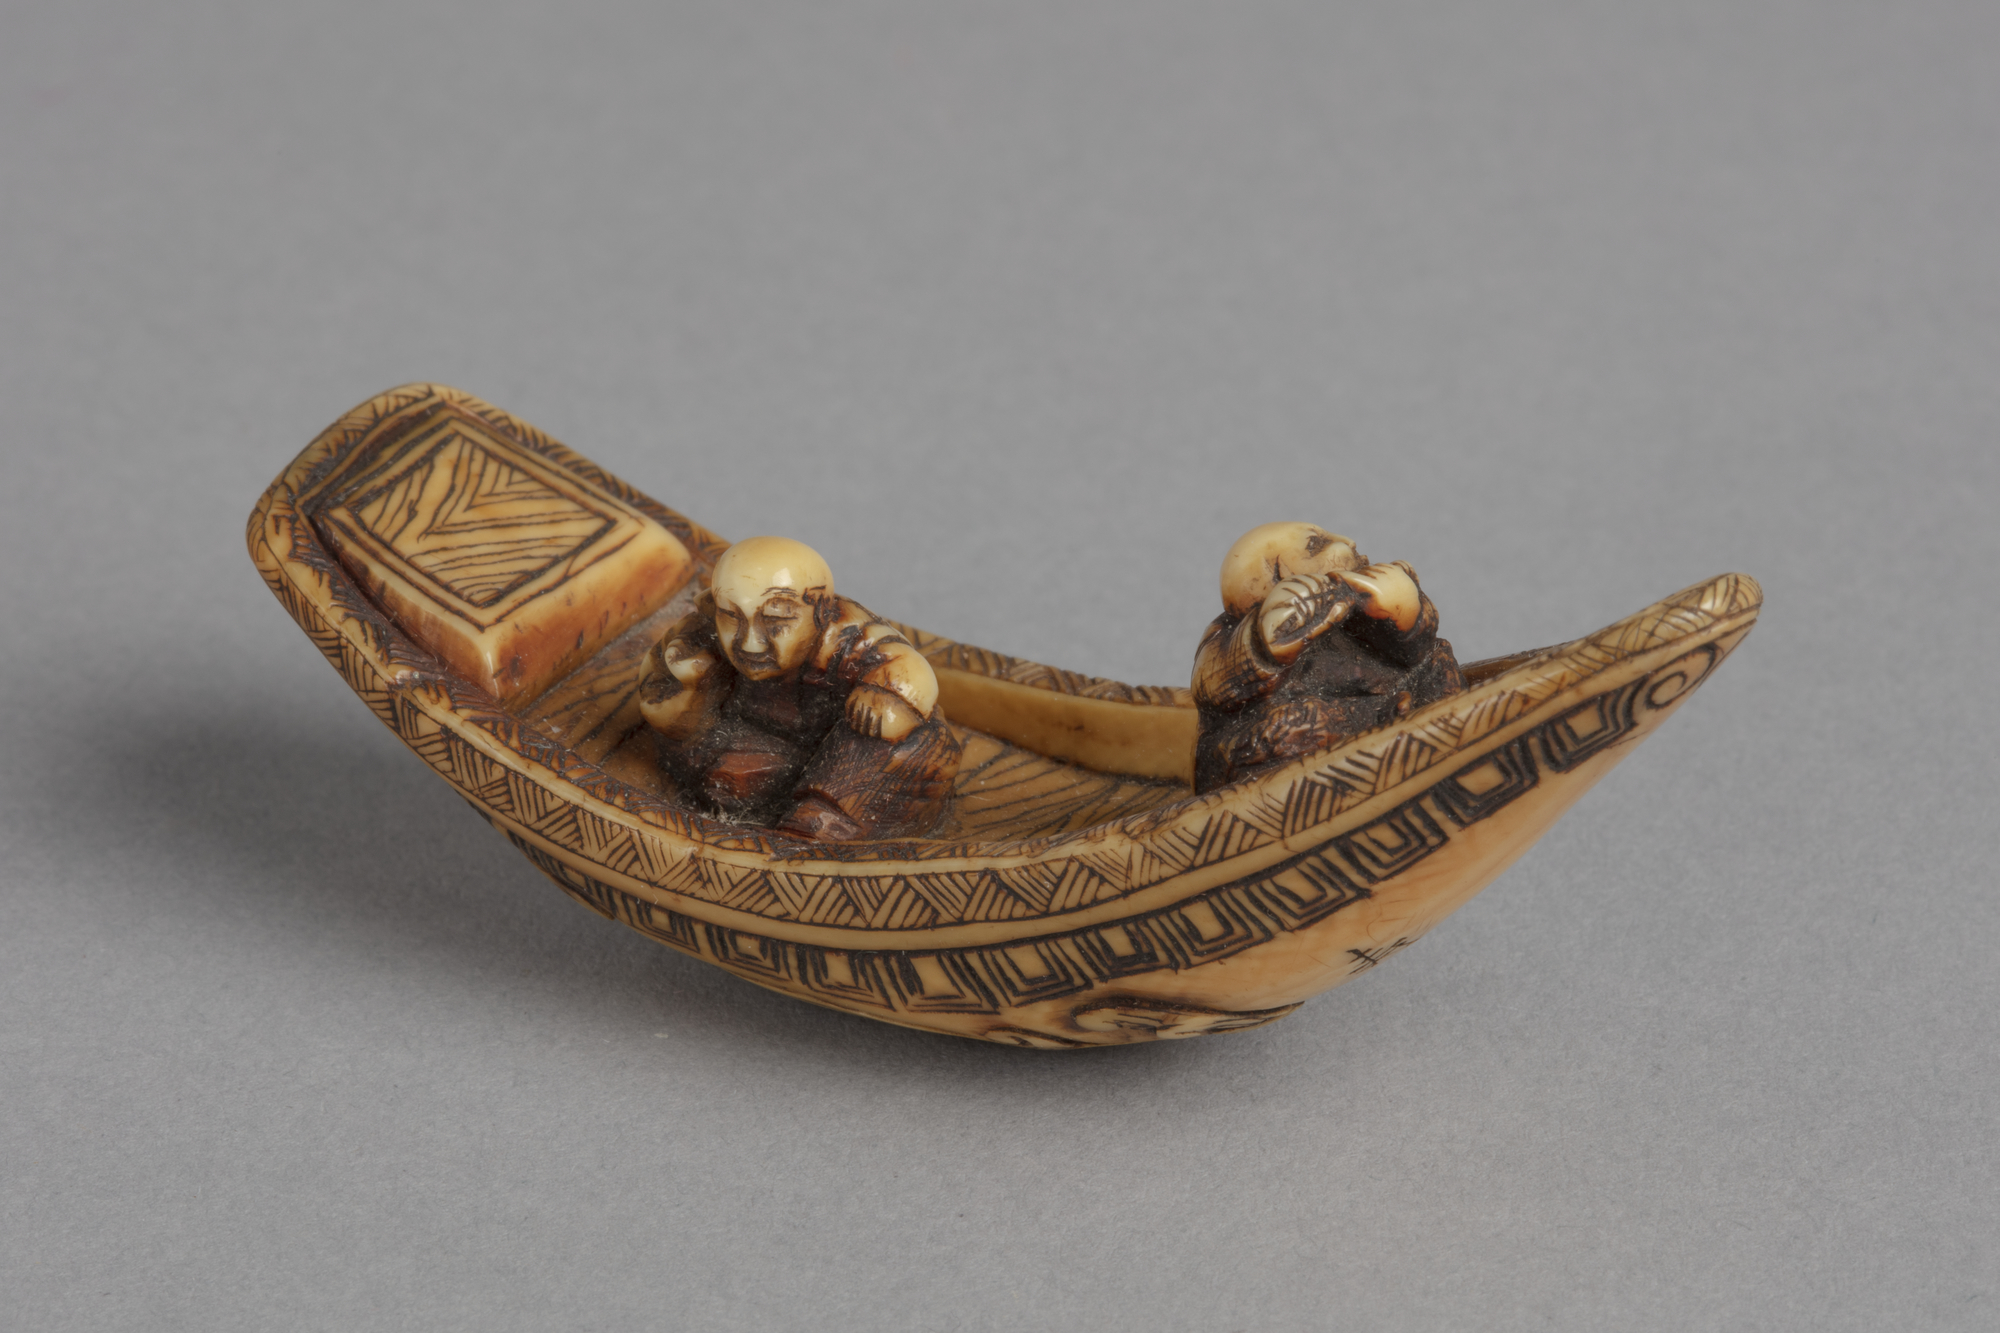 A Japanese ivory netsuke of two seated men, one playing a flute, in a long wooden boat with waves underneath.